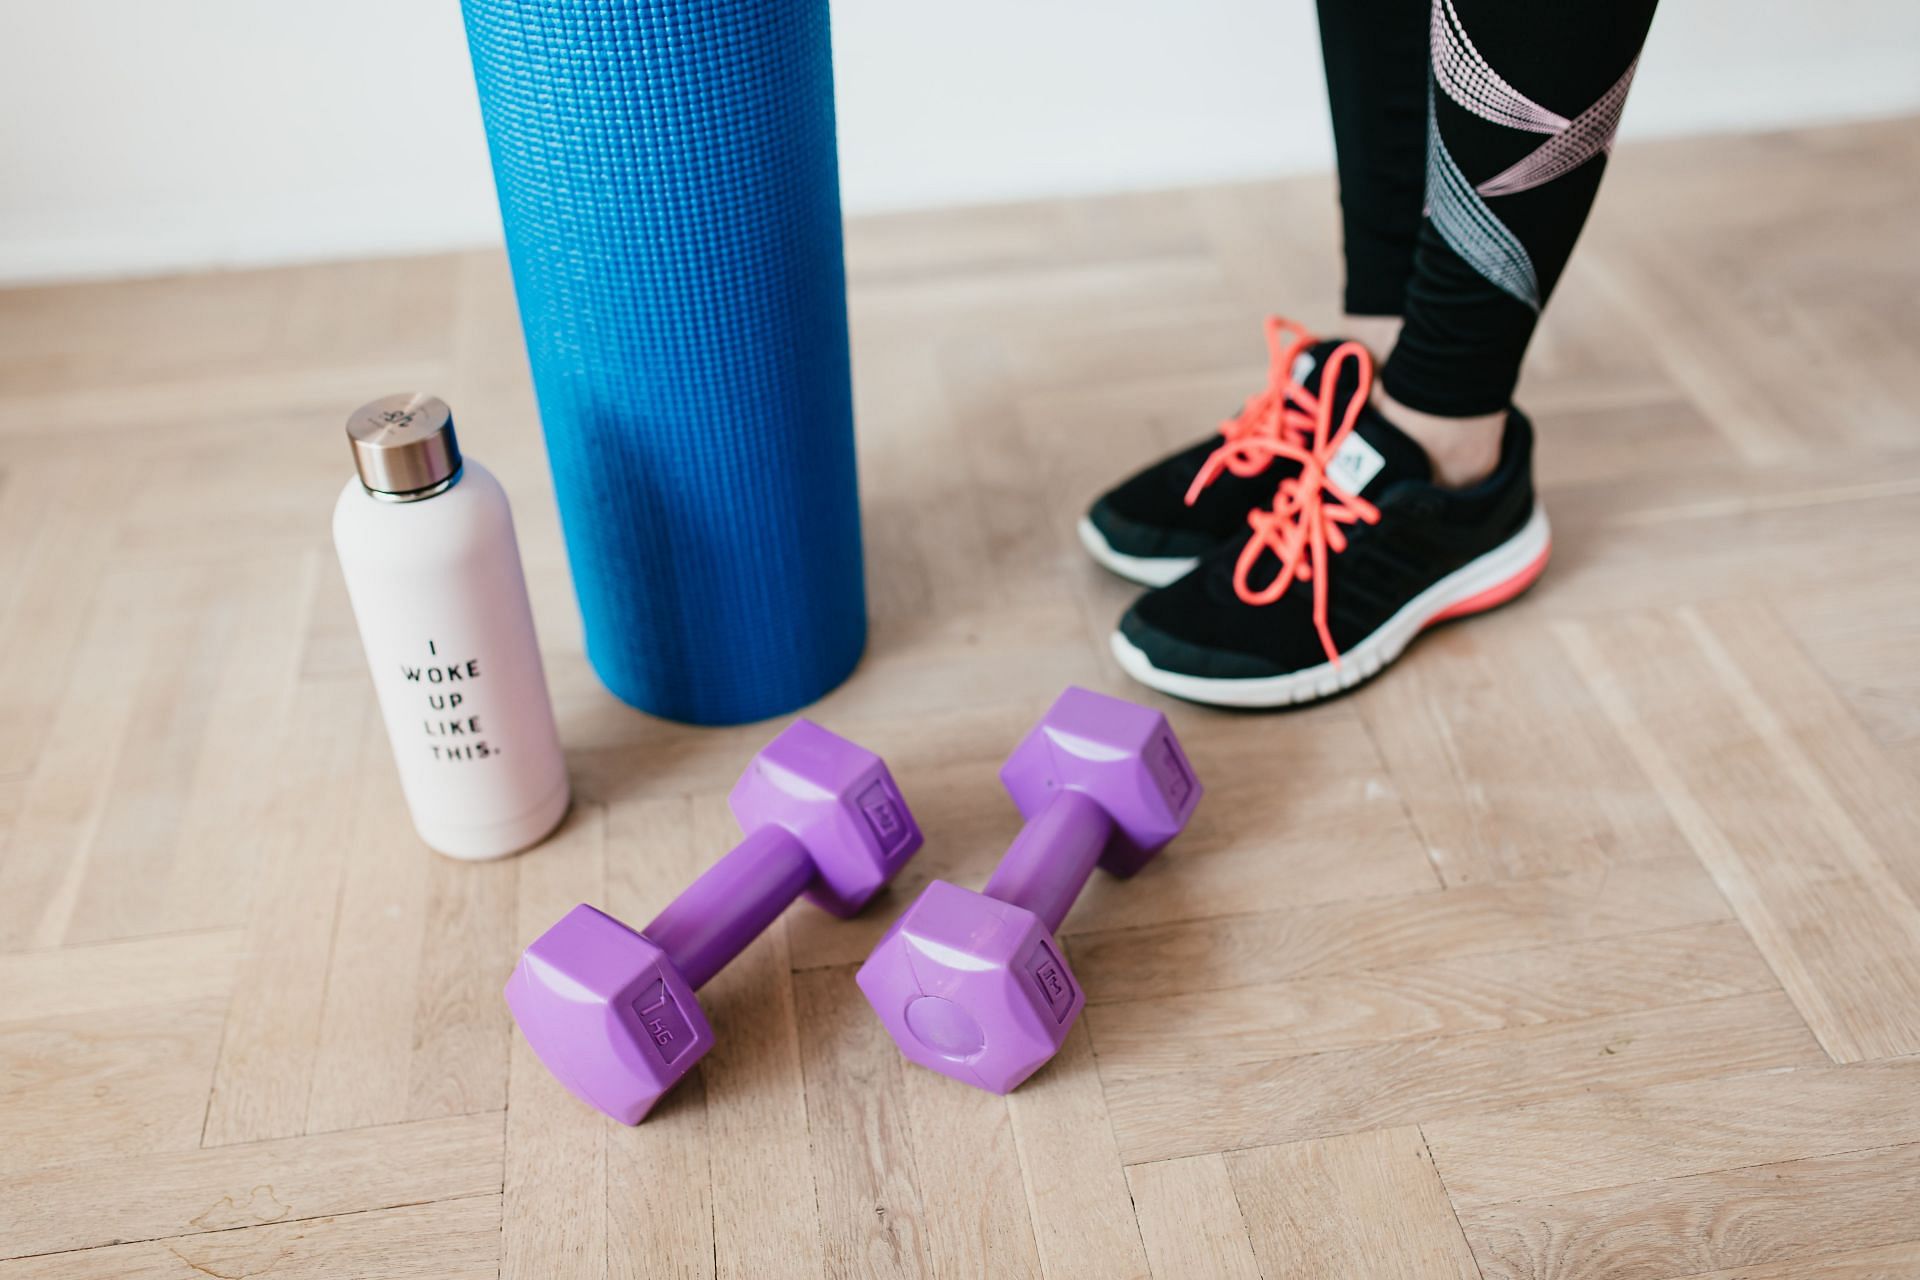 Dumbbell sumo squat can help you to strengthen your lower-body. (Image via Pexels / Karolina Grabowska)